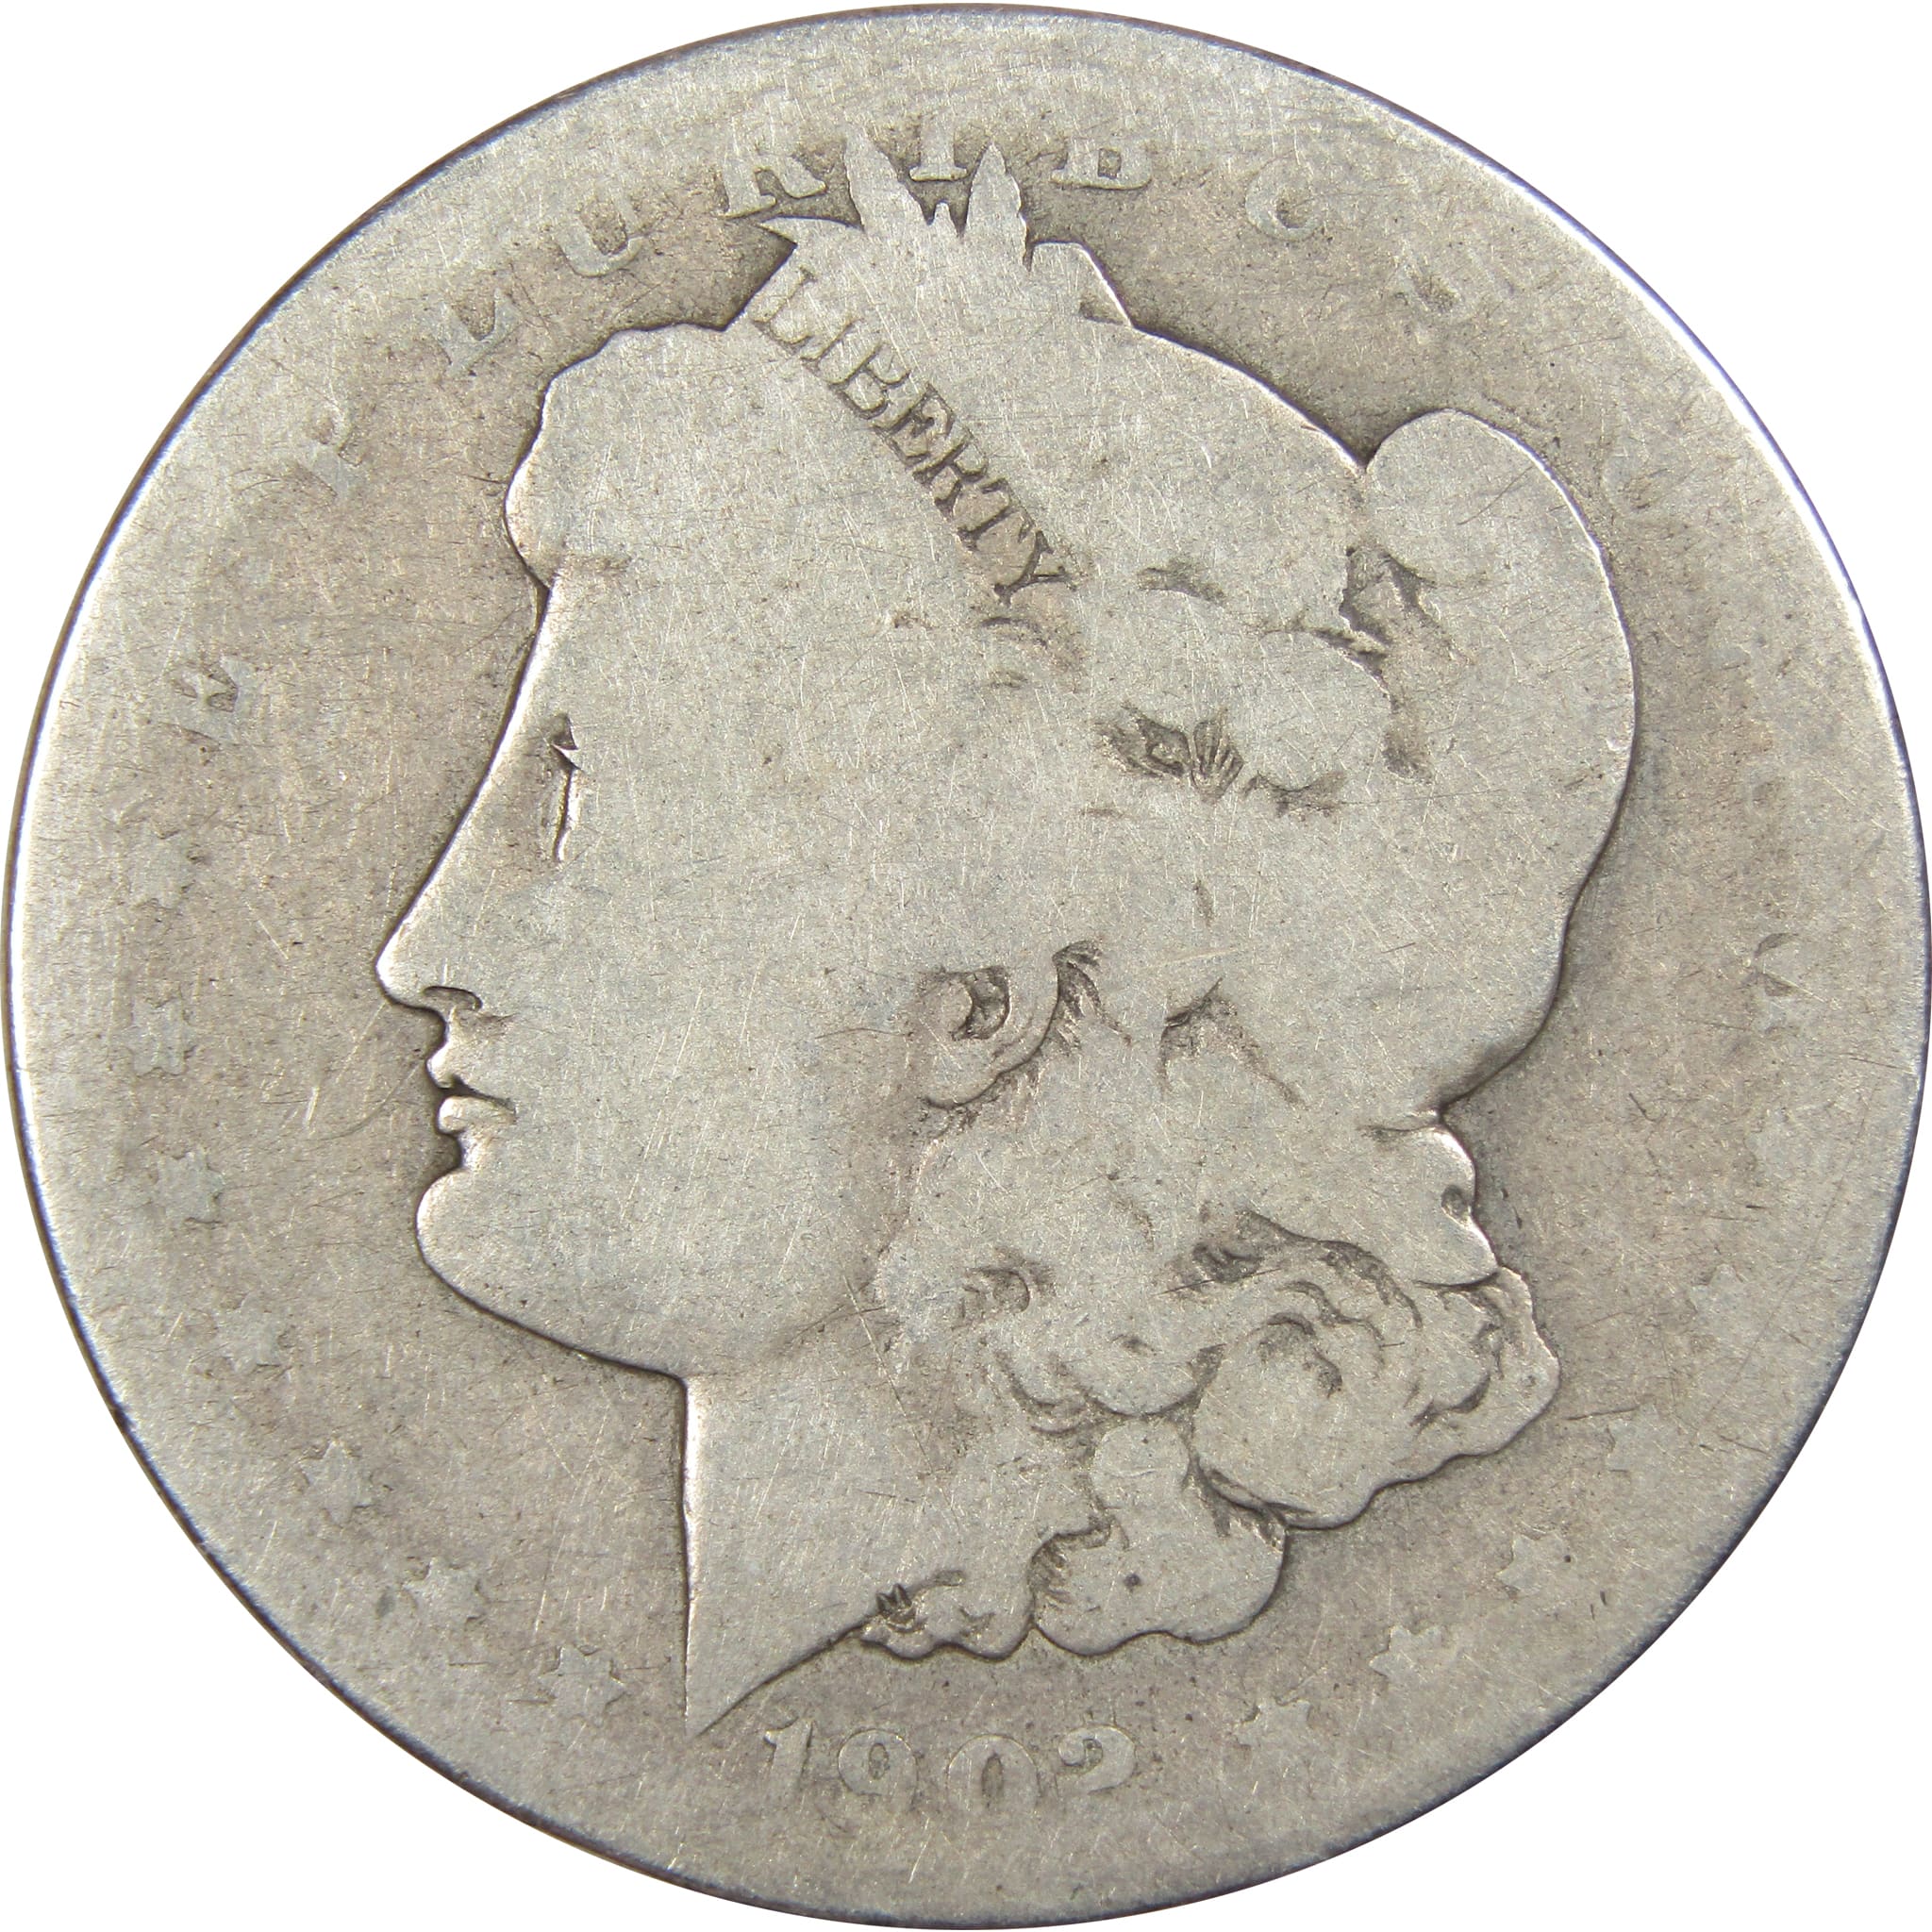 1902 S Morgan Dollar AG About Good 90% Silver US Coin SKU:IPC7432 - Morgan coin - Morgan silver dollar - Morgan silver dollar for sale - Profile Coins &amp; Collectibles